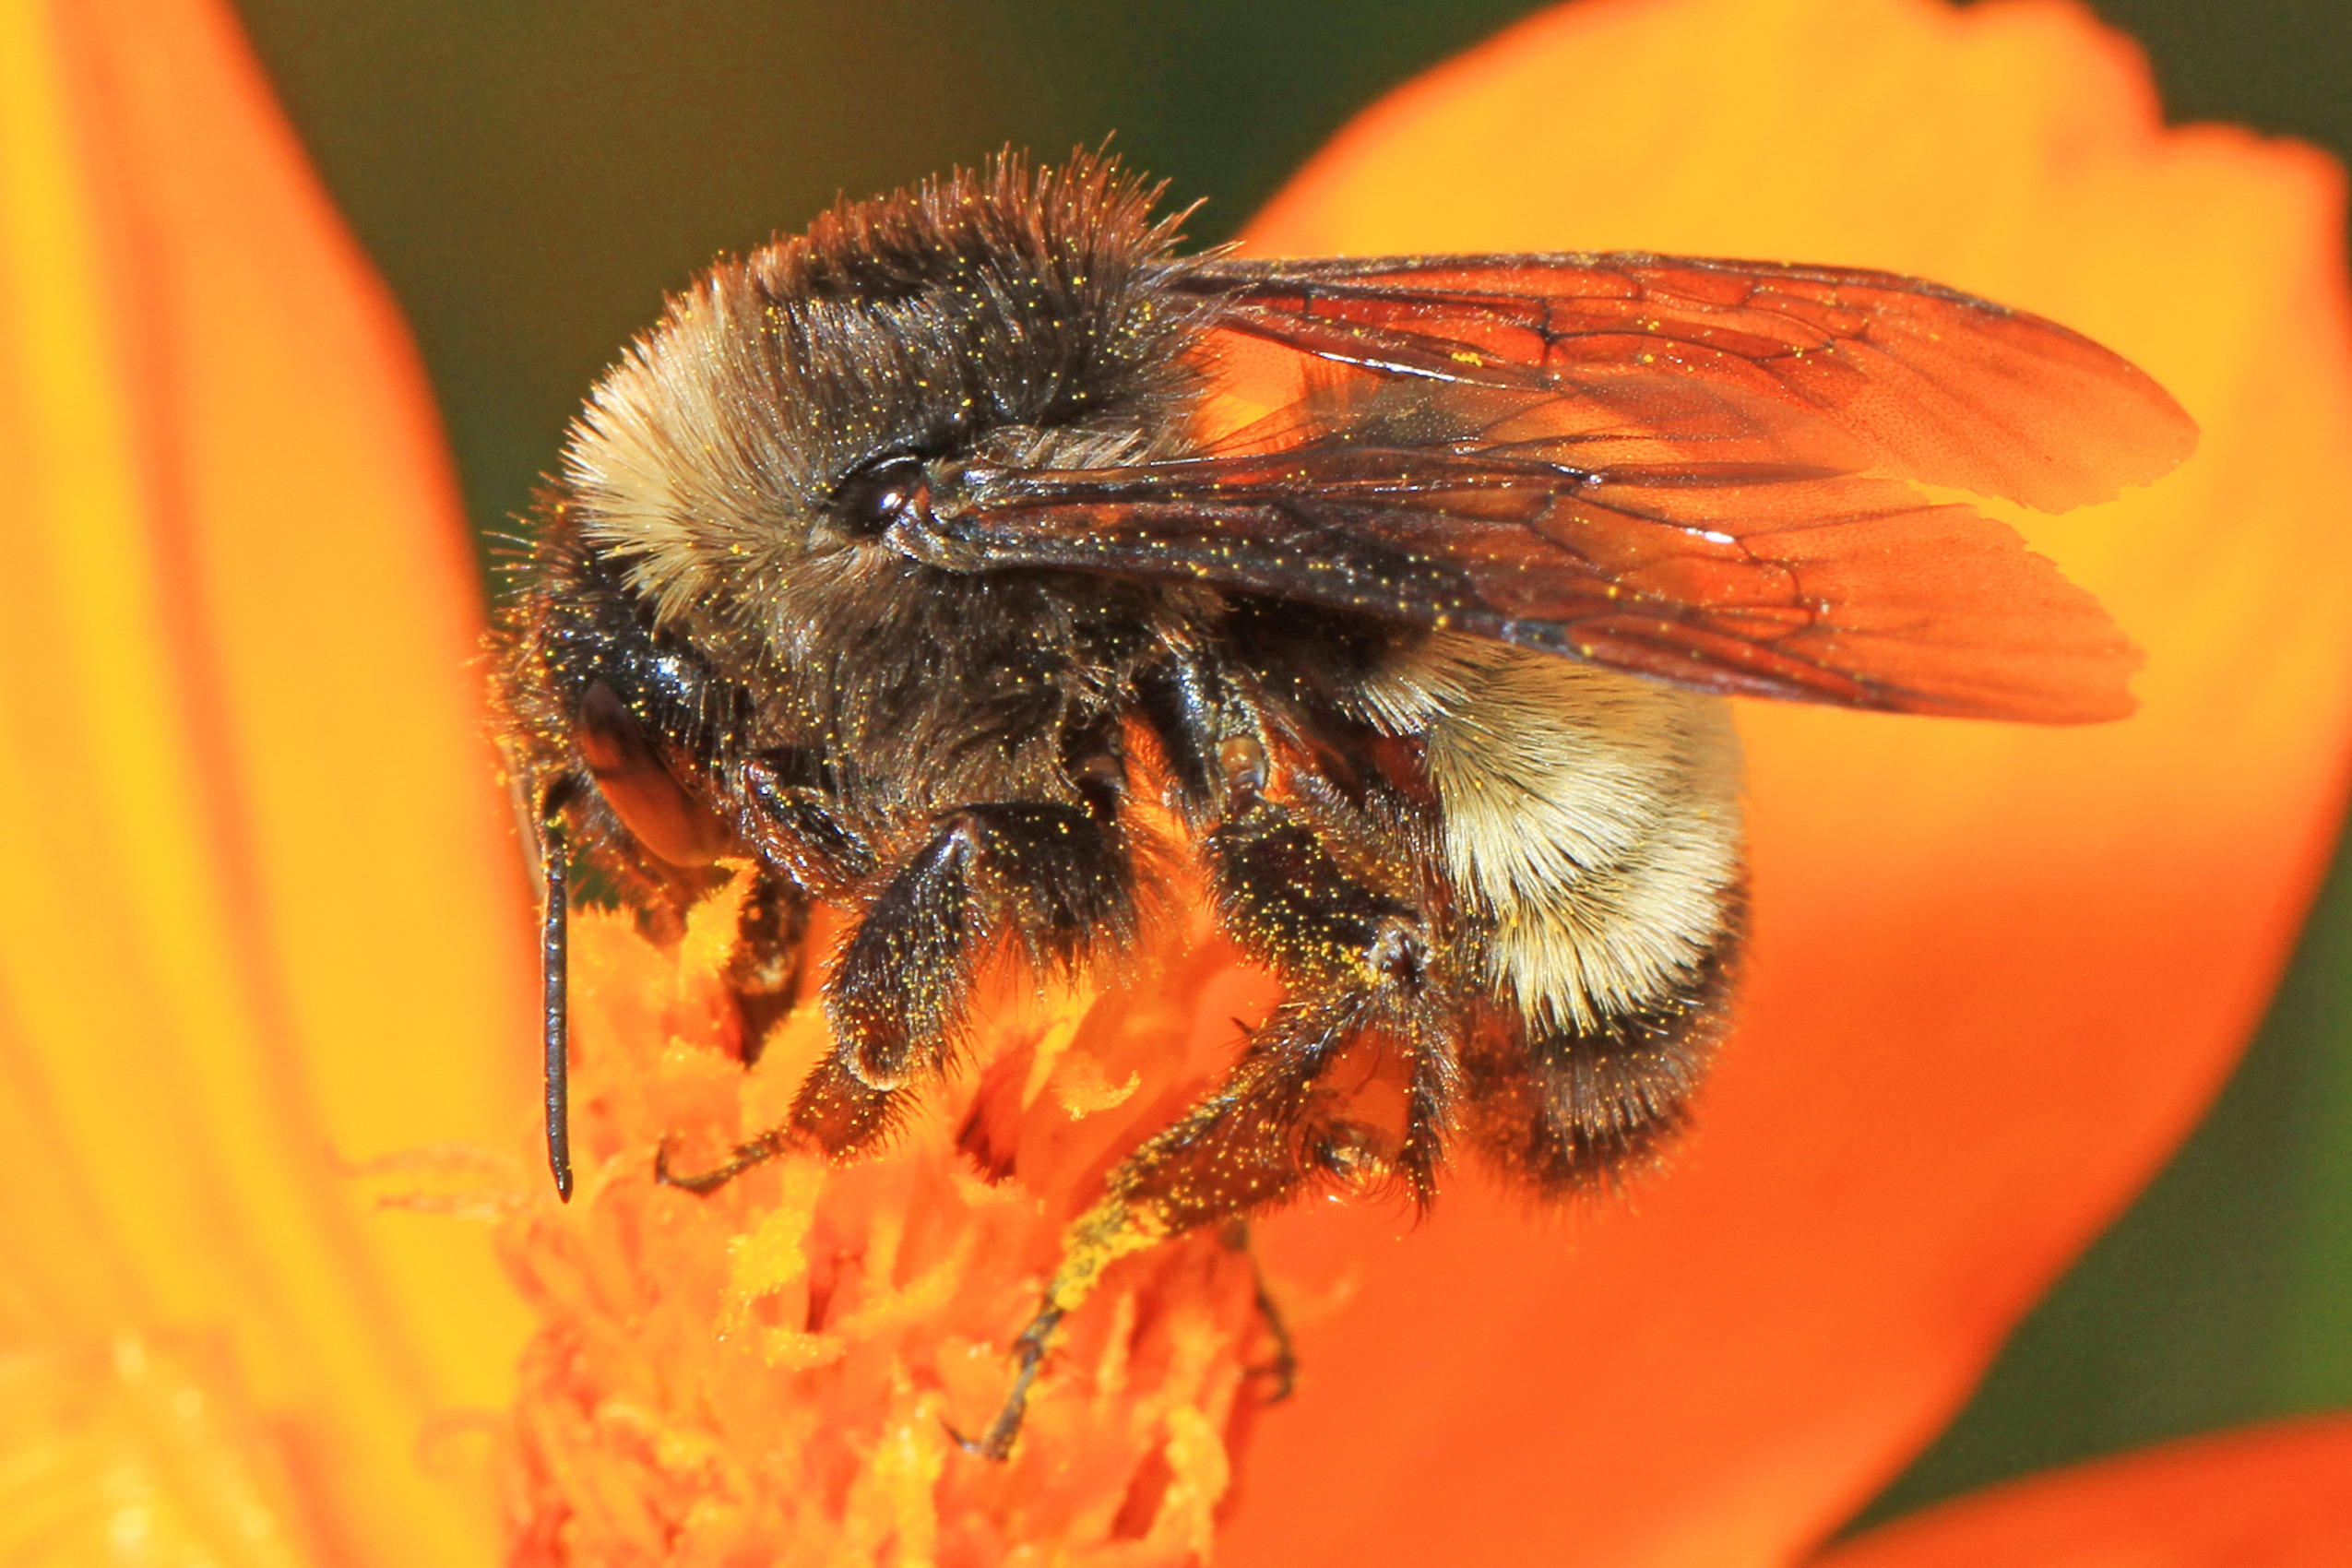 A closeup of a bee on a flower, covered in pollen